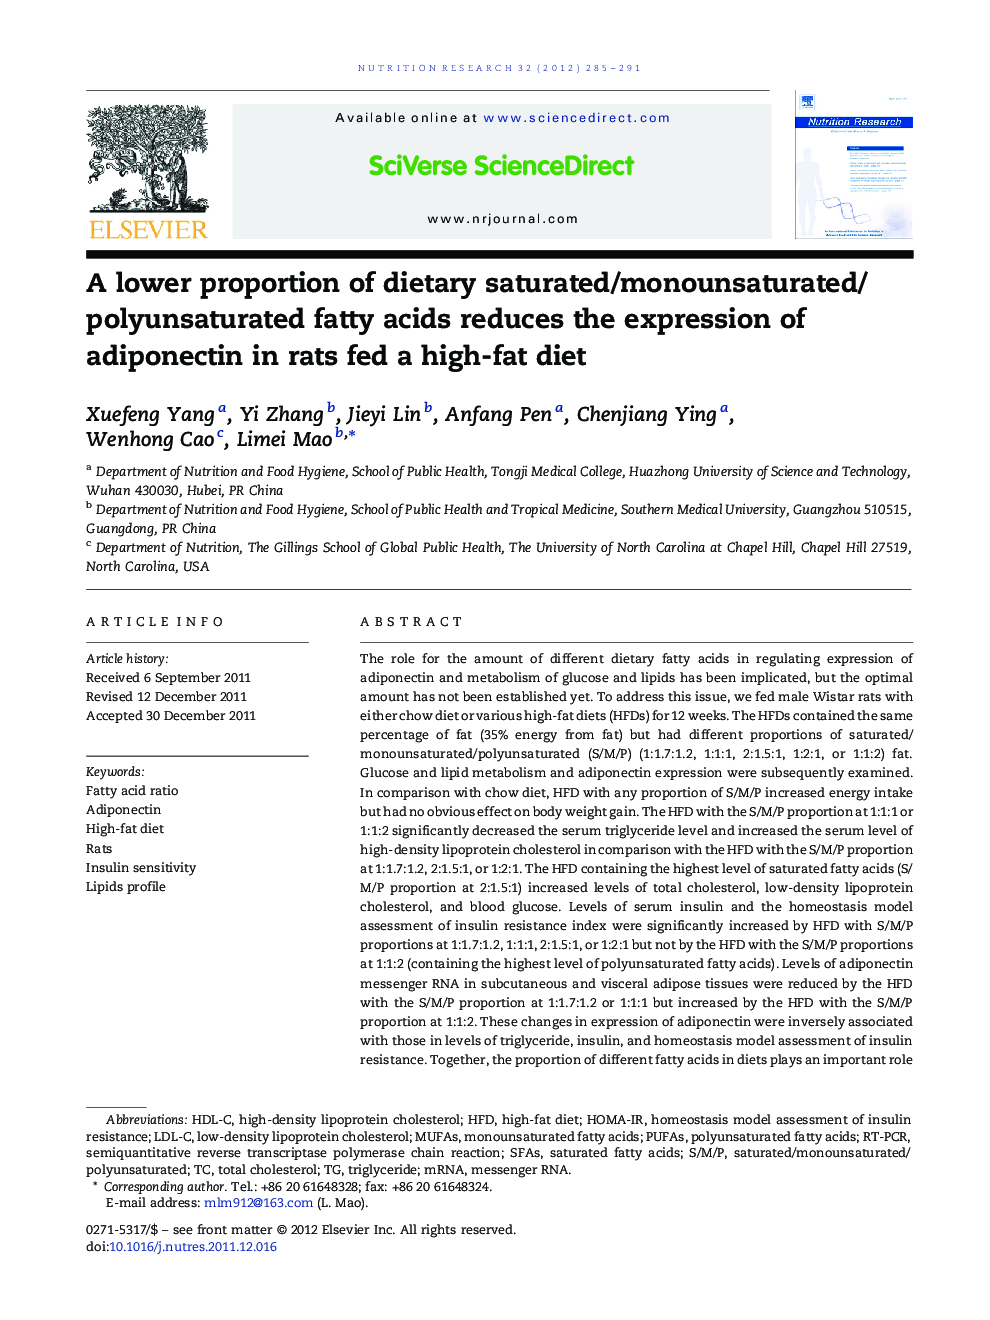 A lower proportion of dietary saturated/monounsaturated/polyunsaturated fatty acids reduces the expression of adiponectin in rats fed a high-fat diet